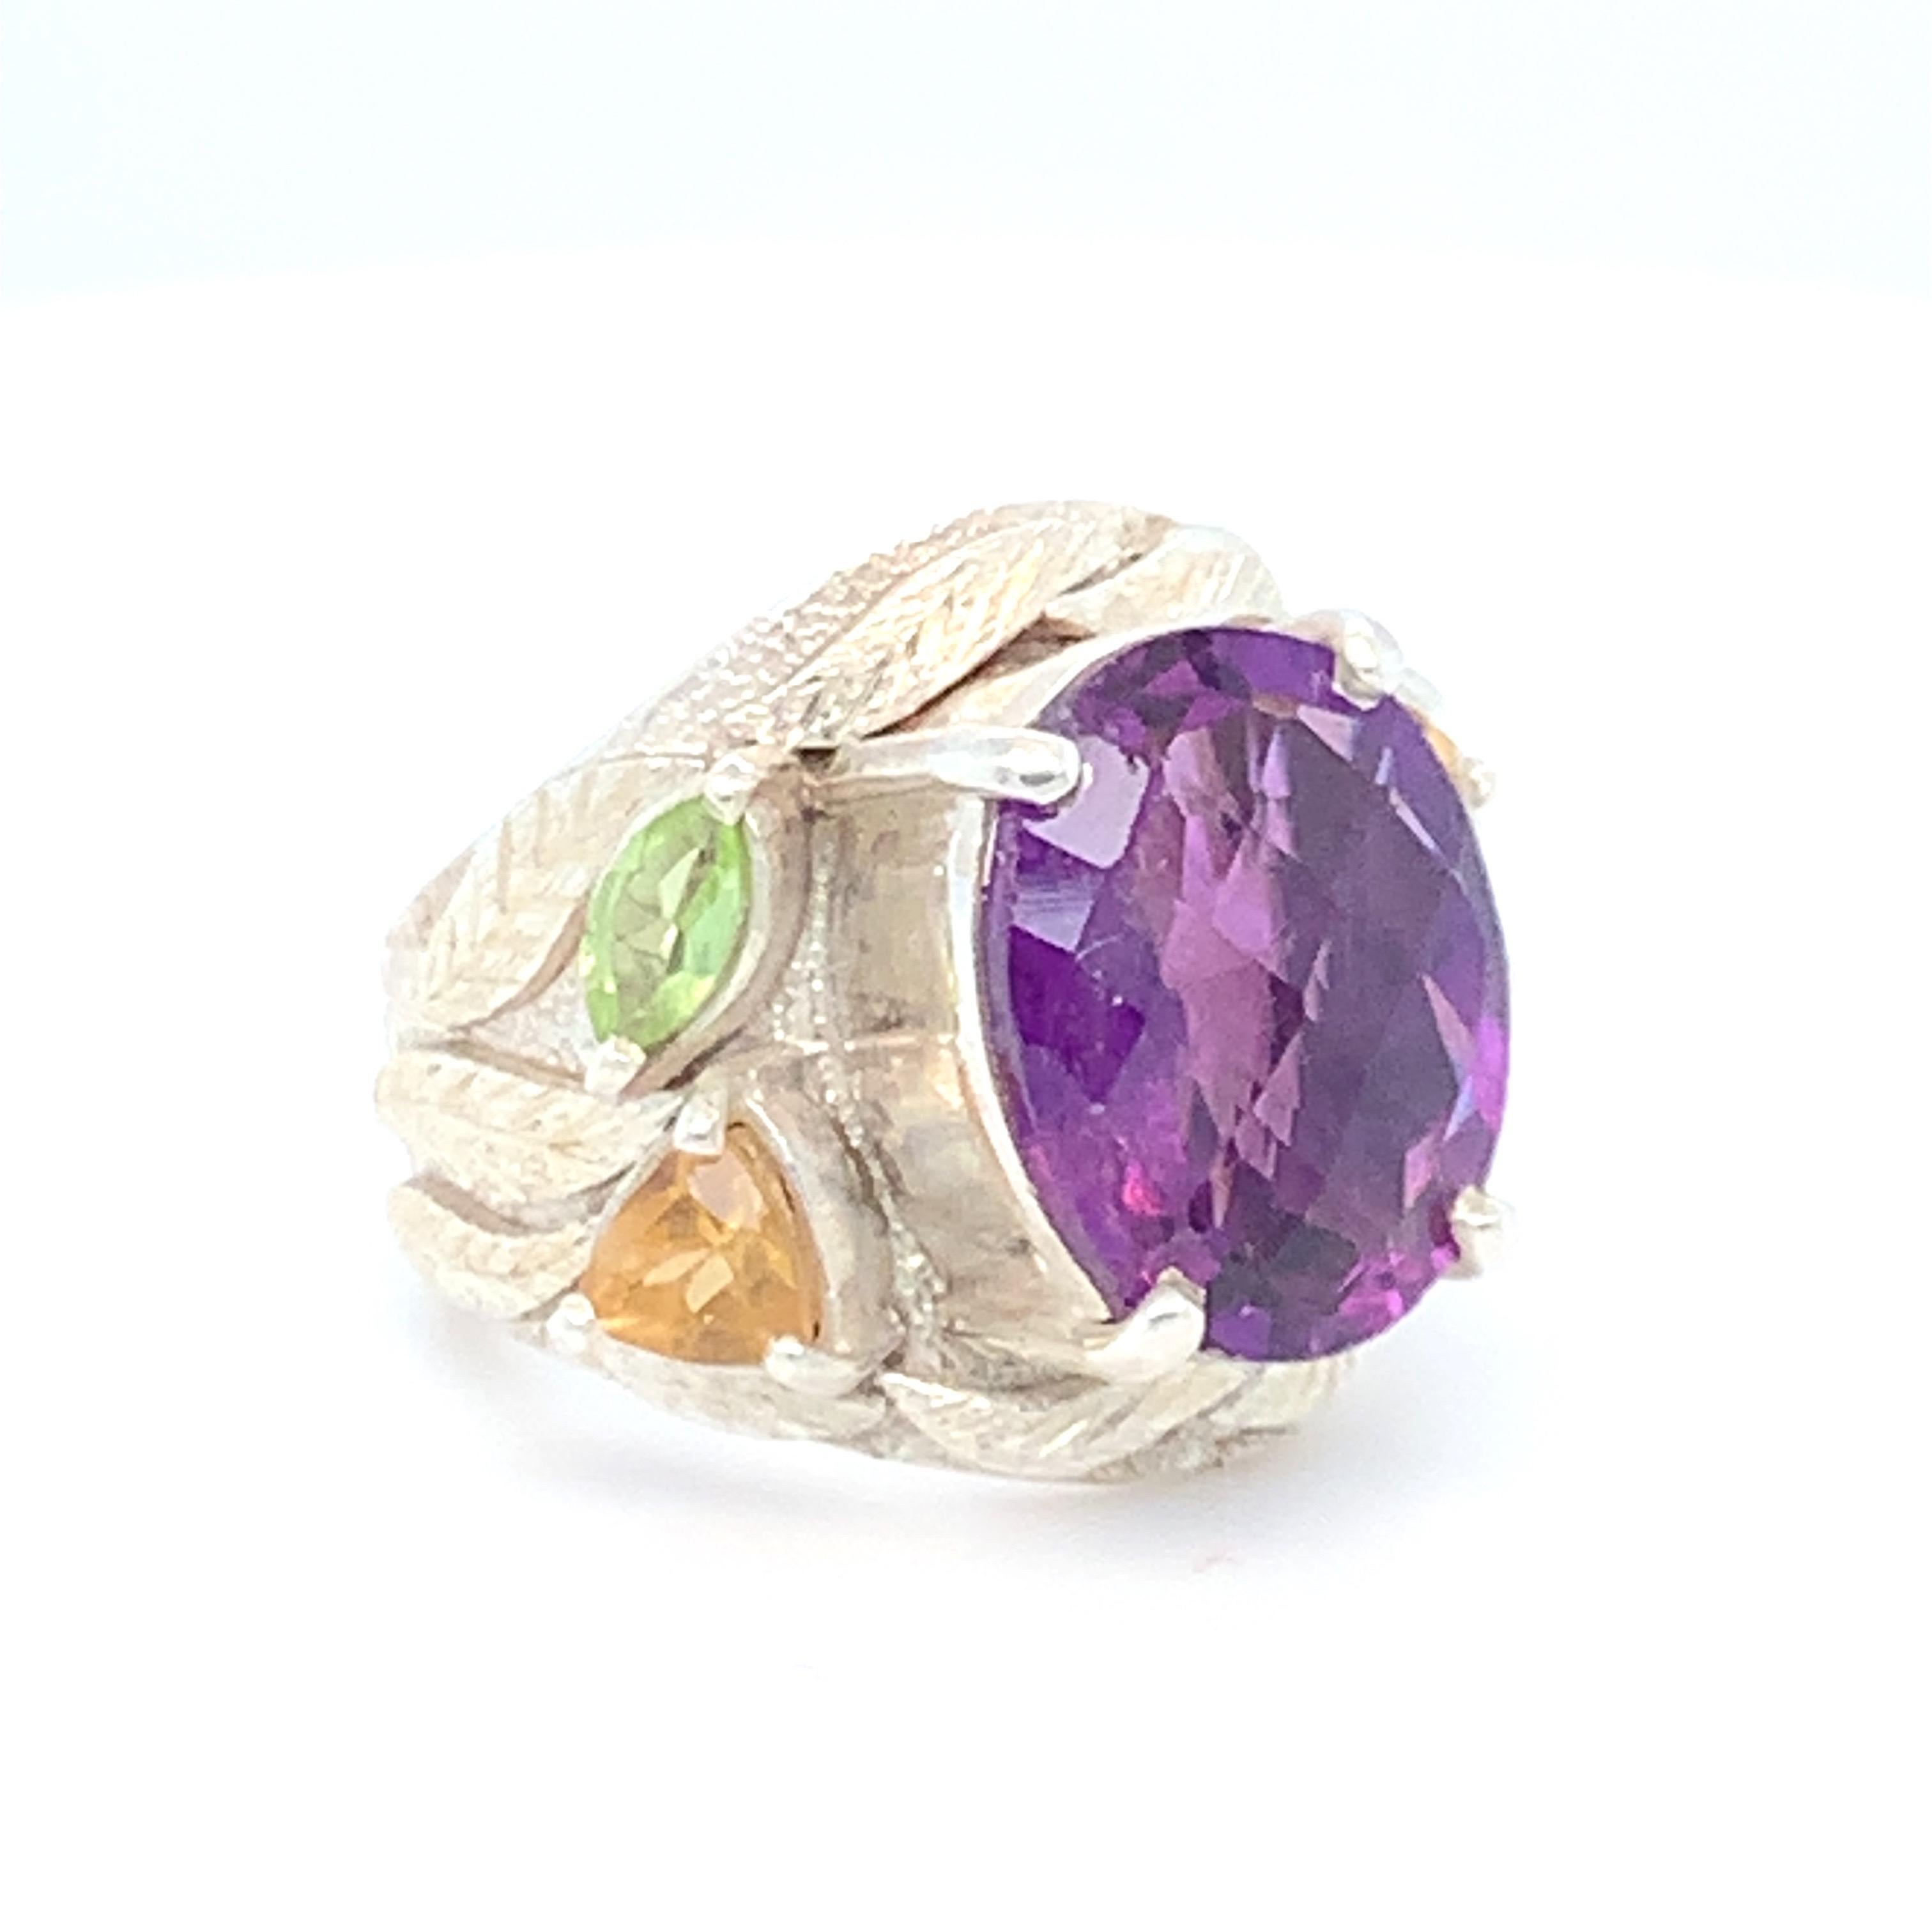 Natural checkerboard cut Amethyst is the center stone of this vibrant cocktail ring. Trillion citrine, marquise peridot and garnet with intricately crafted leaves on each sides enhances the beauty of this ring. Set in sterling silver and carefully